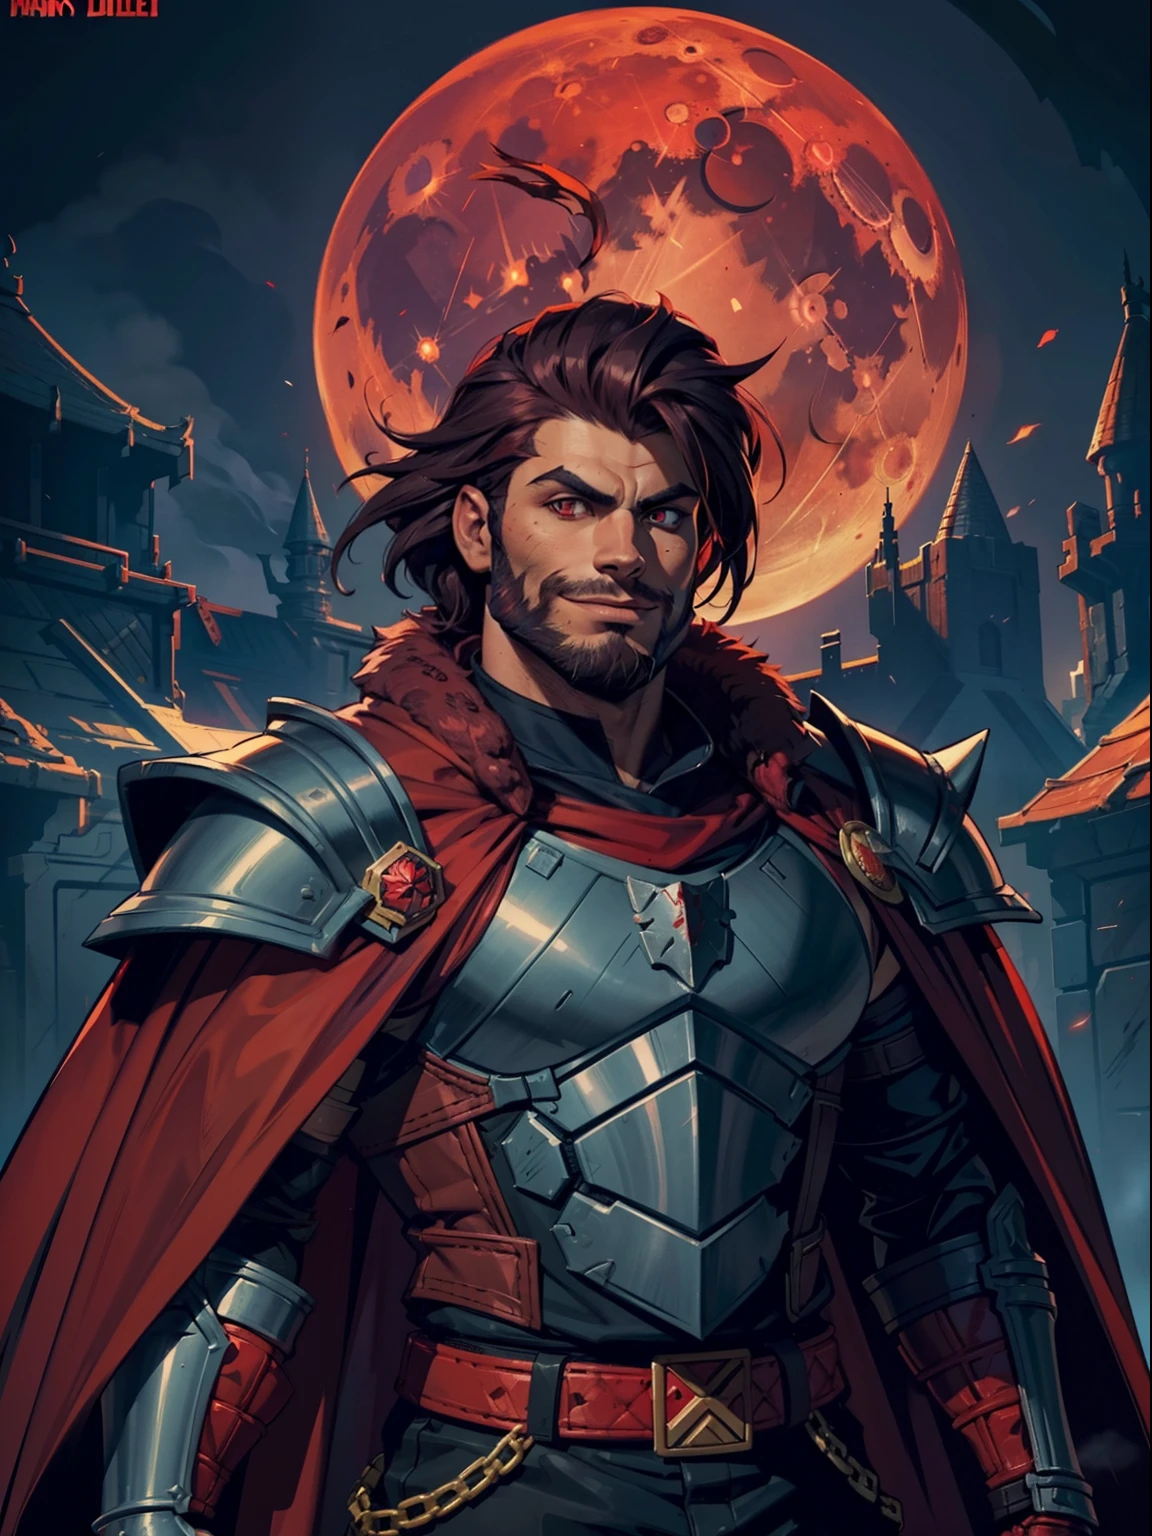 Dark night blood moon background, Darkest Dungeon style, game portrait. Sadurang from Marvel, hunk, buffed physics, short mane hair, mullet, defined face, detailed eyes, short beard, glowing red eyes, dark hair, wily smile, badass, dangerous. Wearing full armor with red dragon scales, cape of furs. Breath fire.